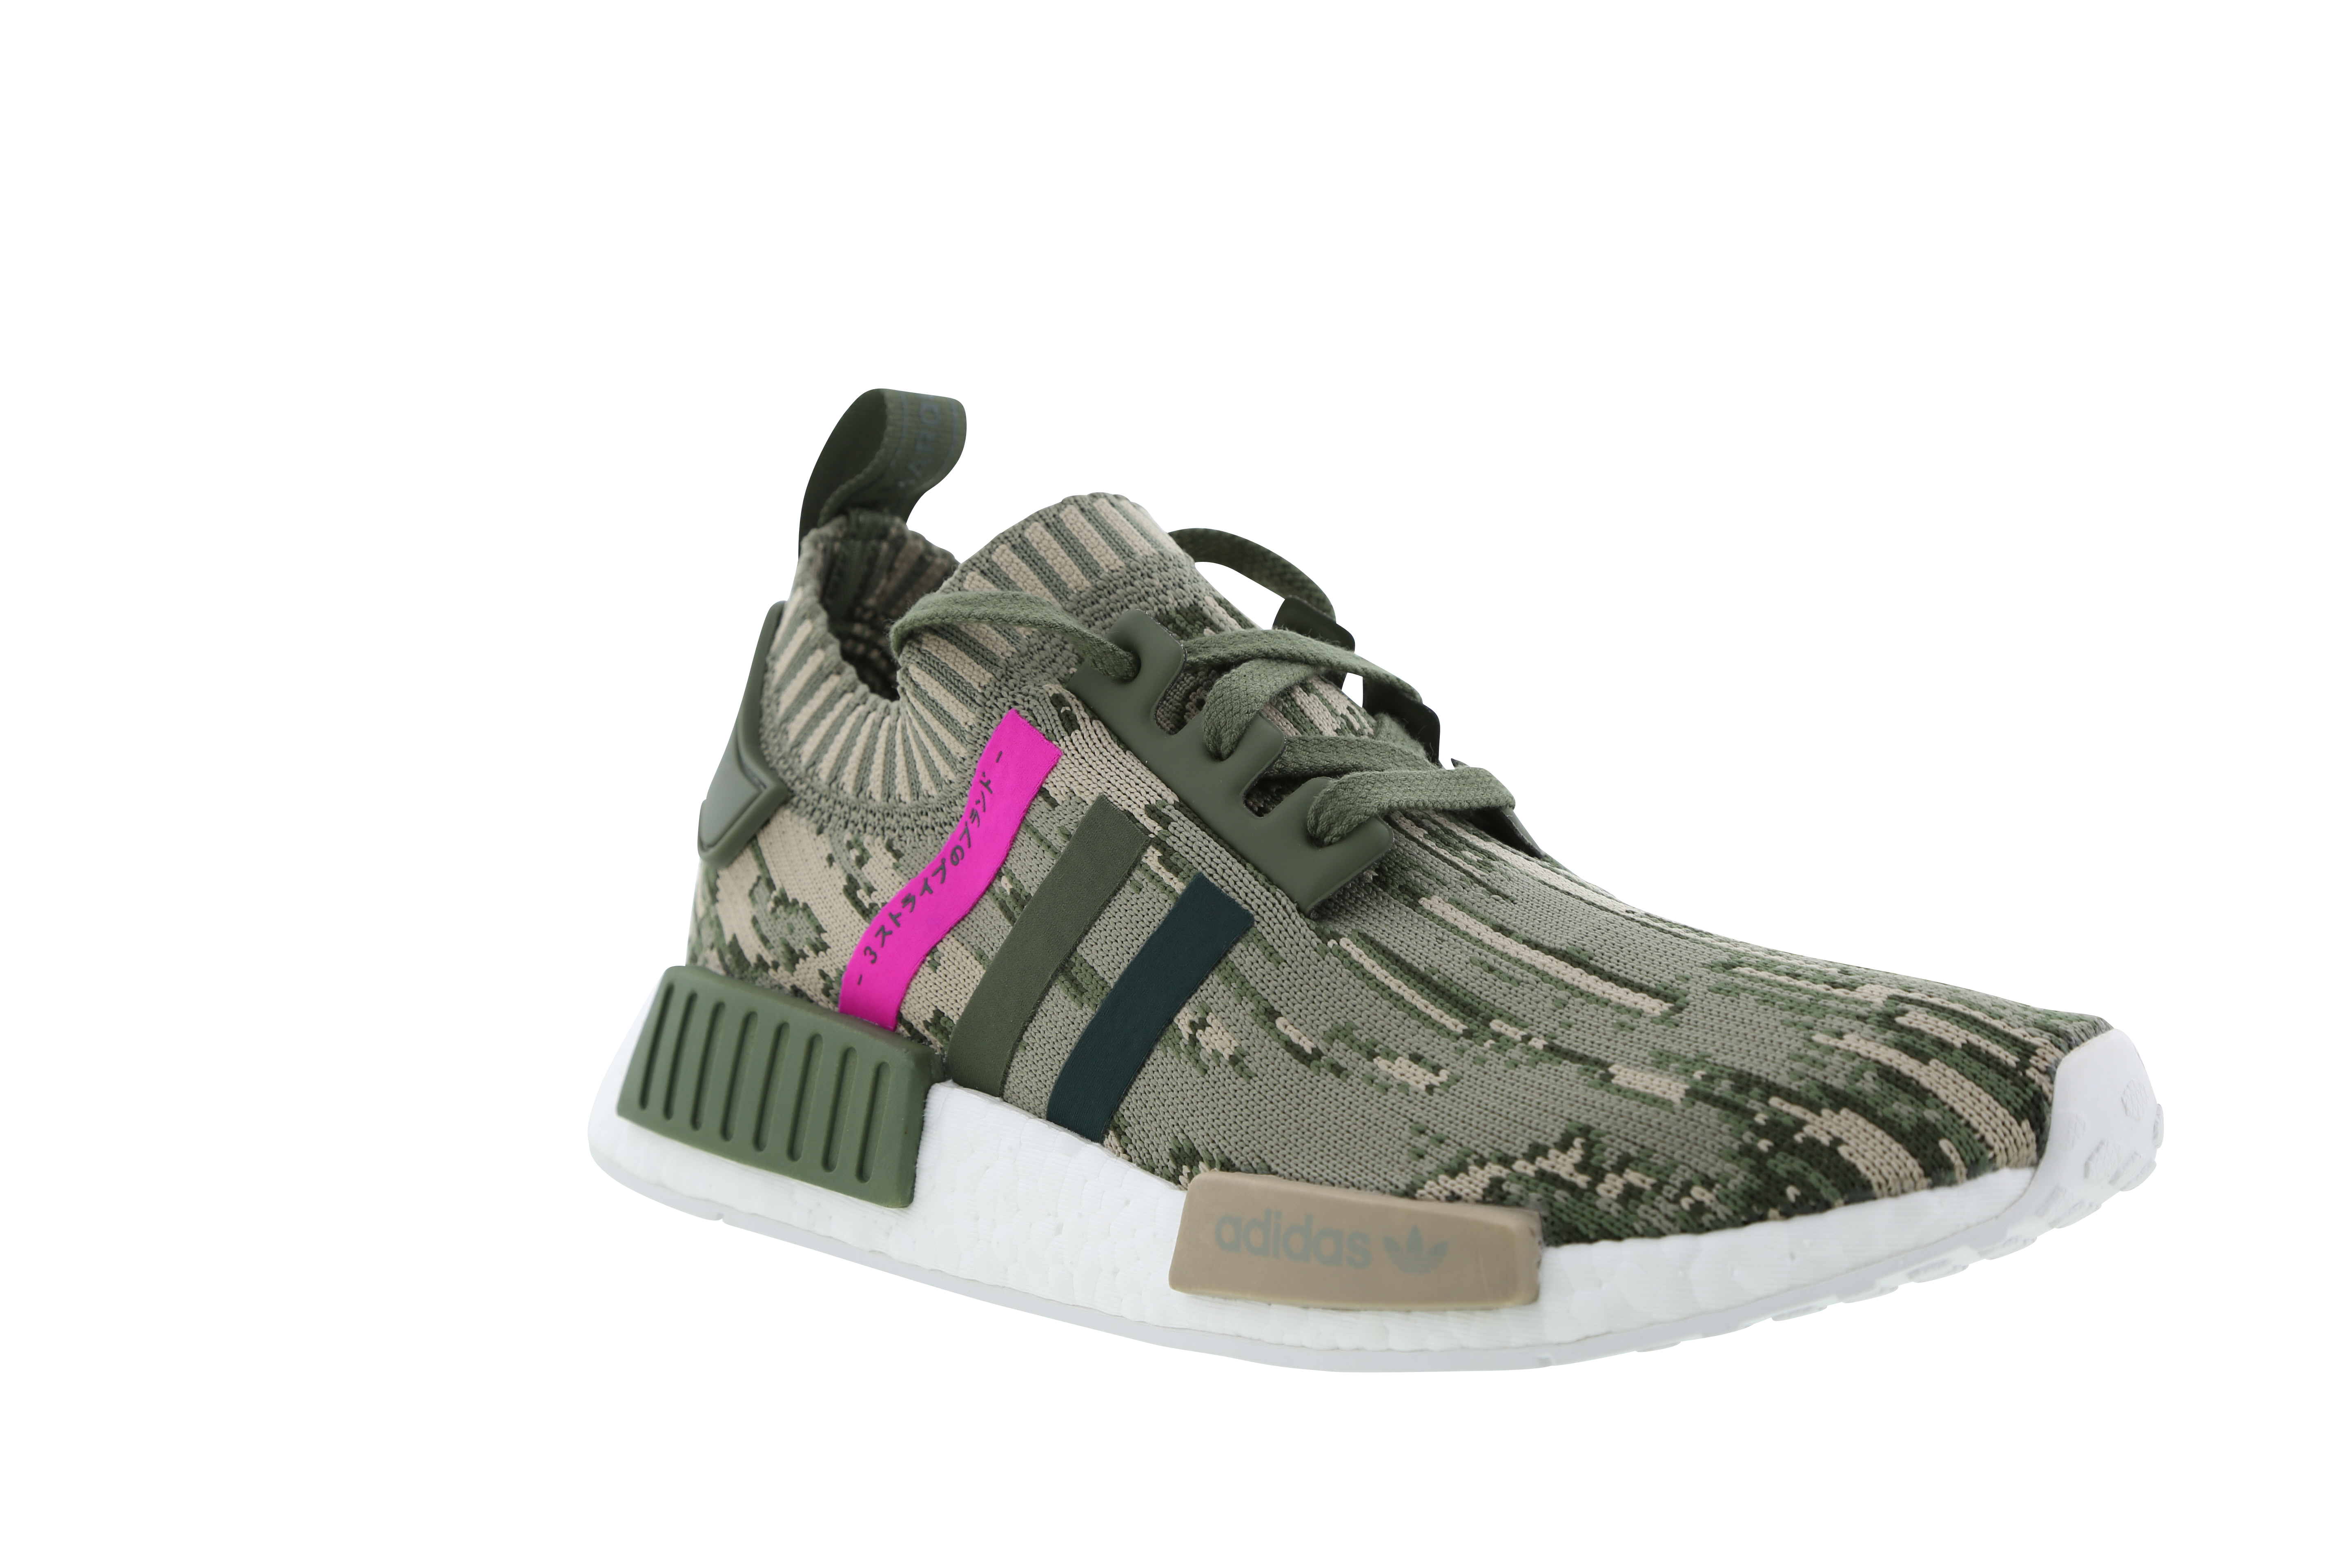 nmd r1 camouflage